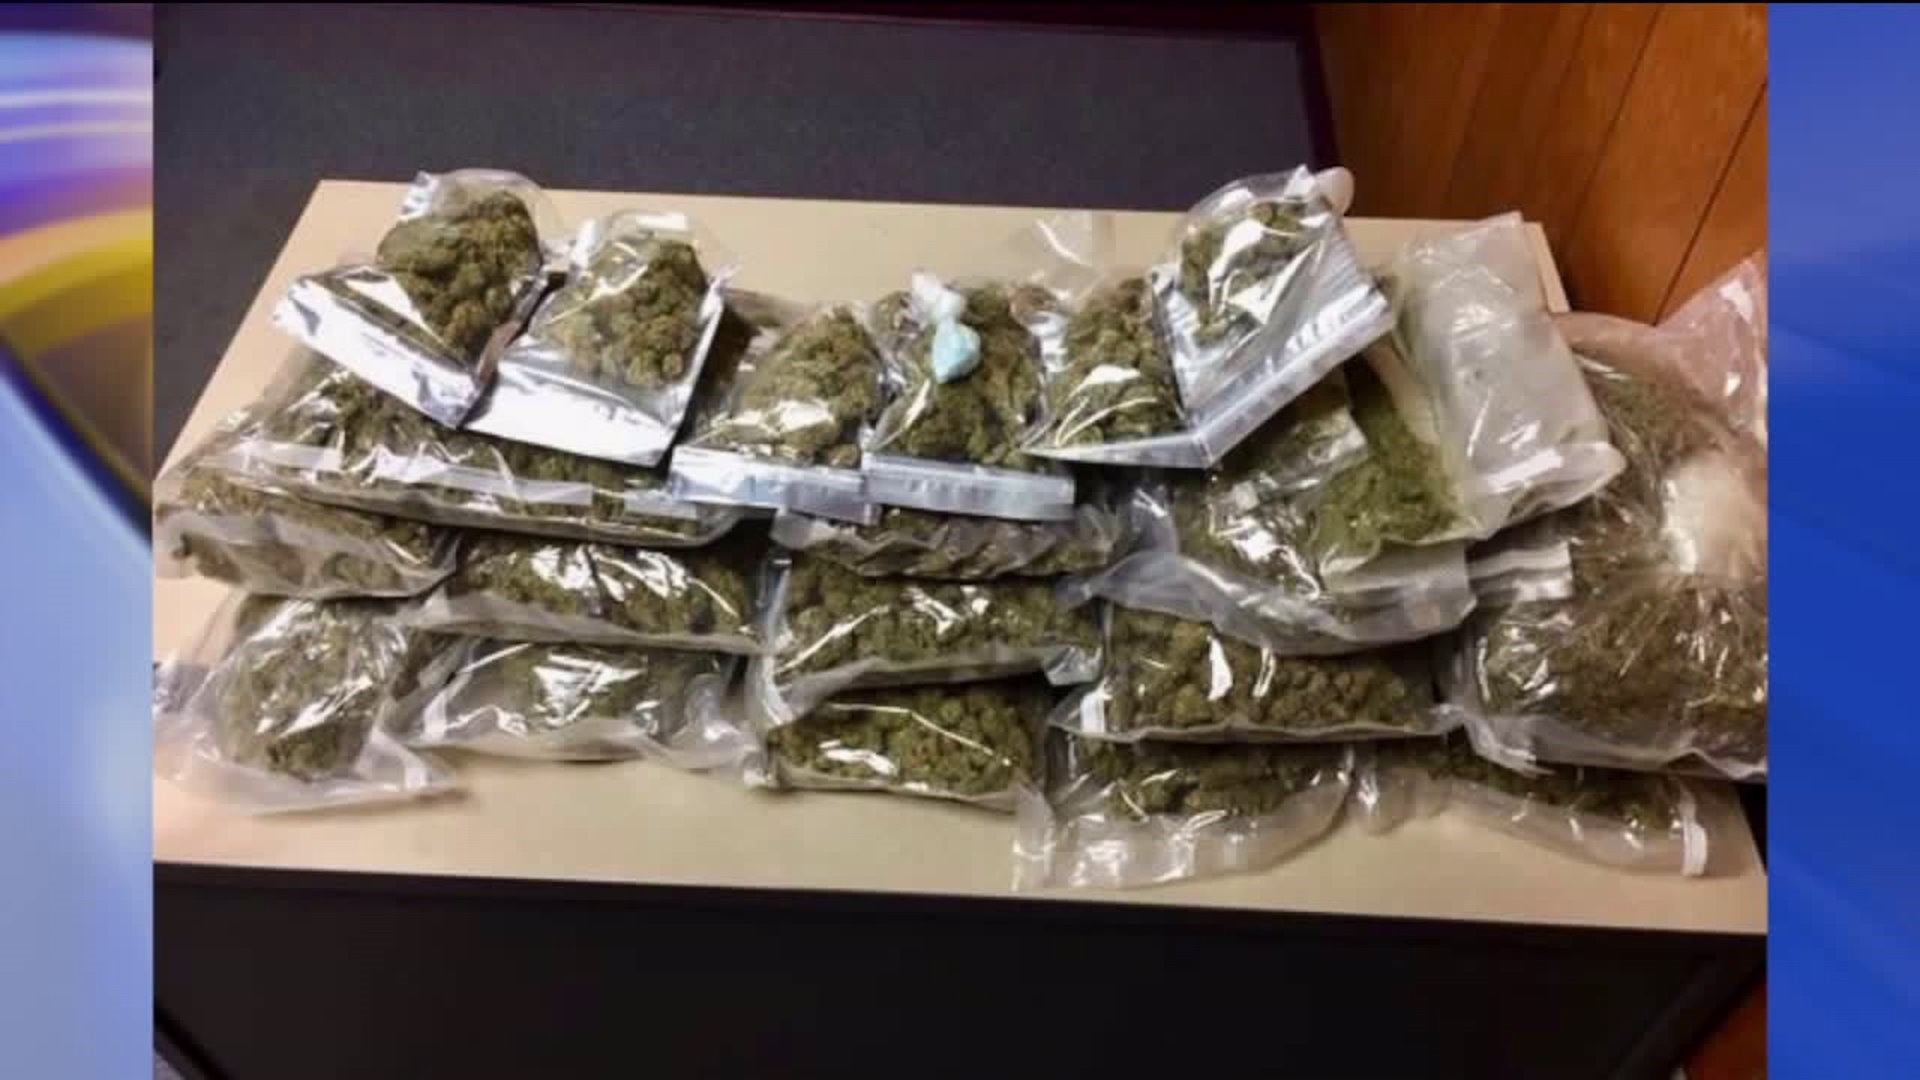 Police: Man Caught with $70K worth of Pot